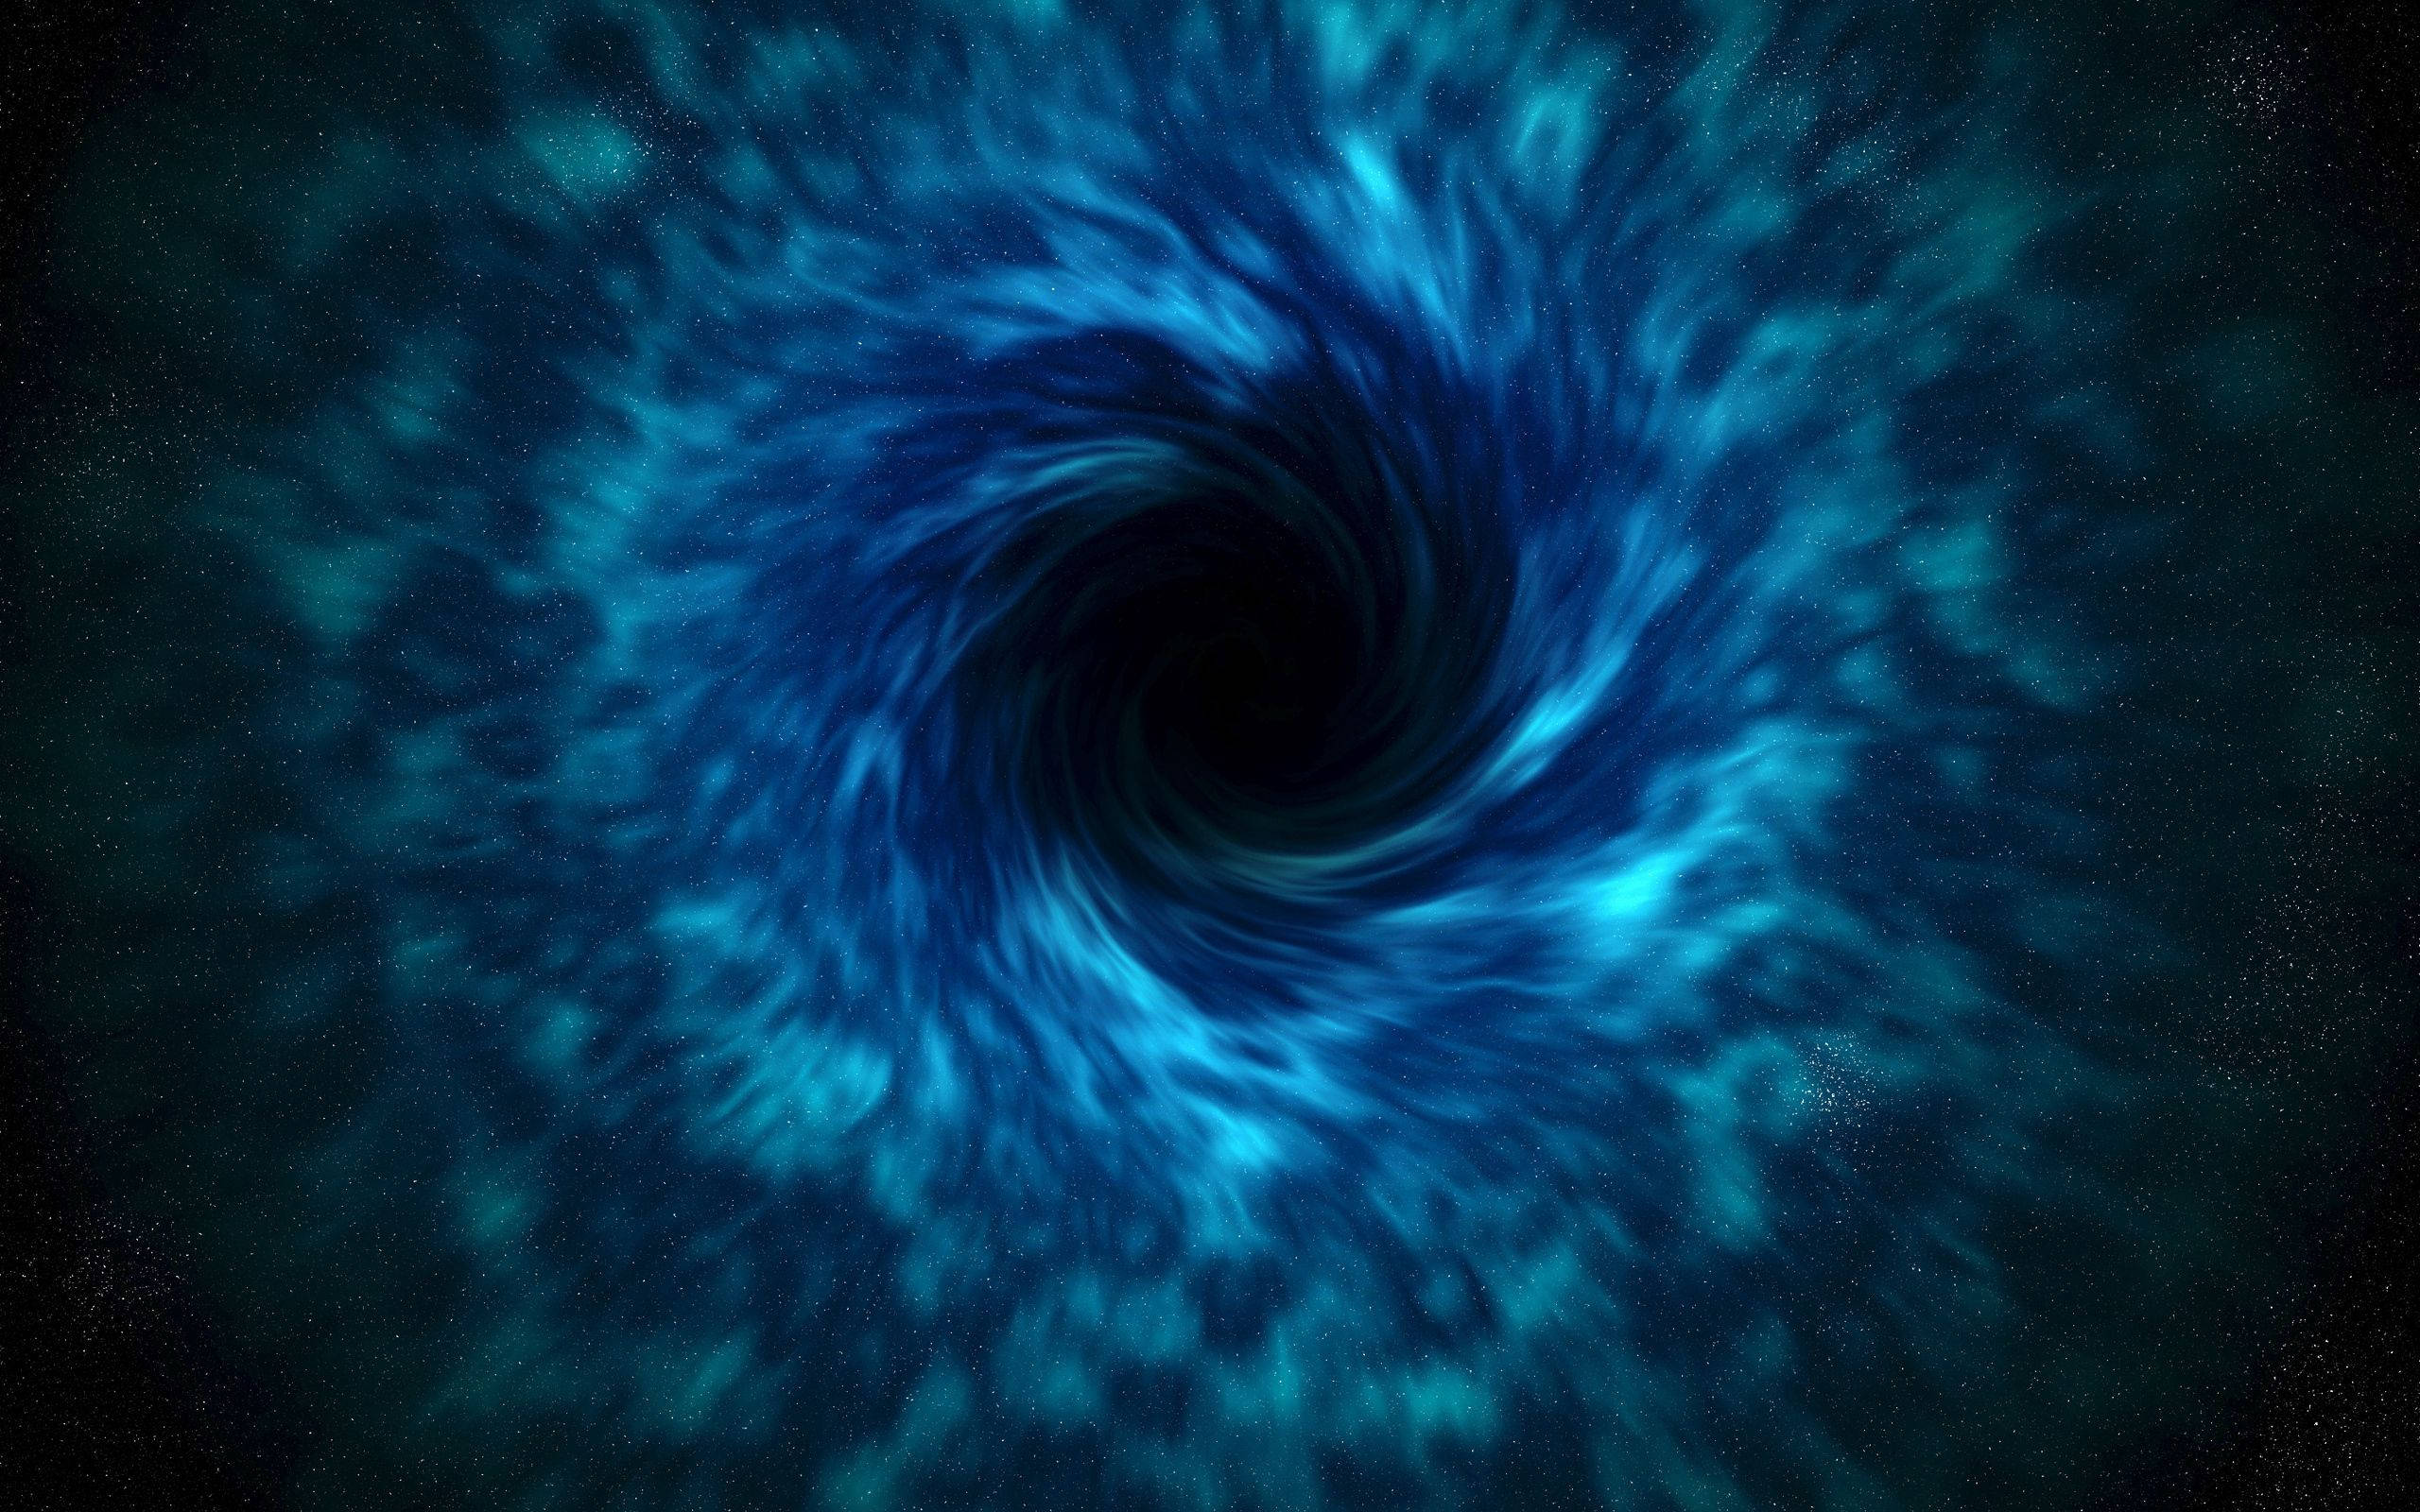 Black Hole Distortion In The Galaxy Background